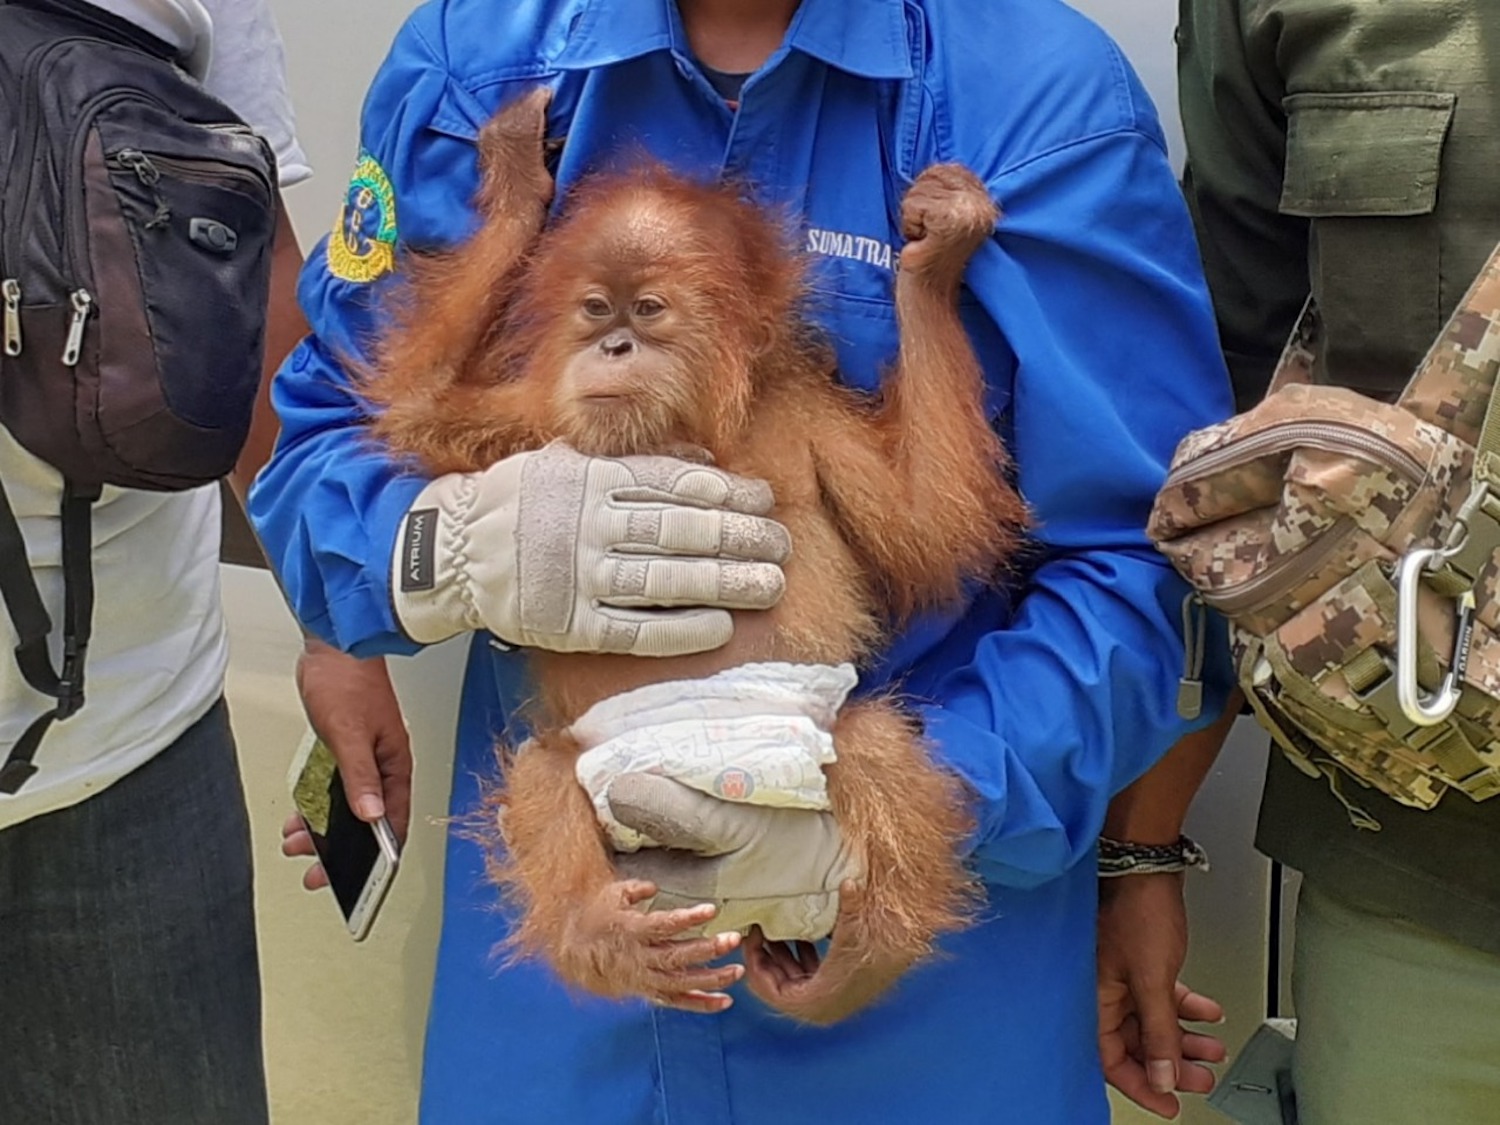 This Is How Critically Endangered Orangutans Are Trafficked, According to a  Former Illegal Trader